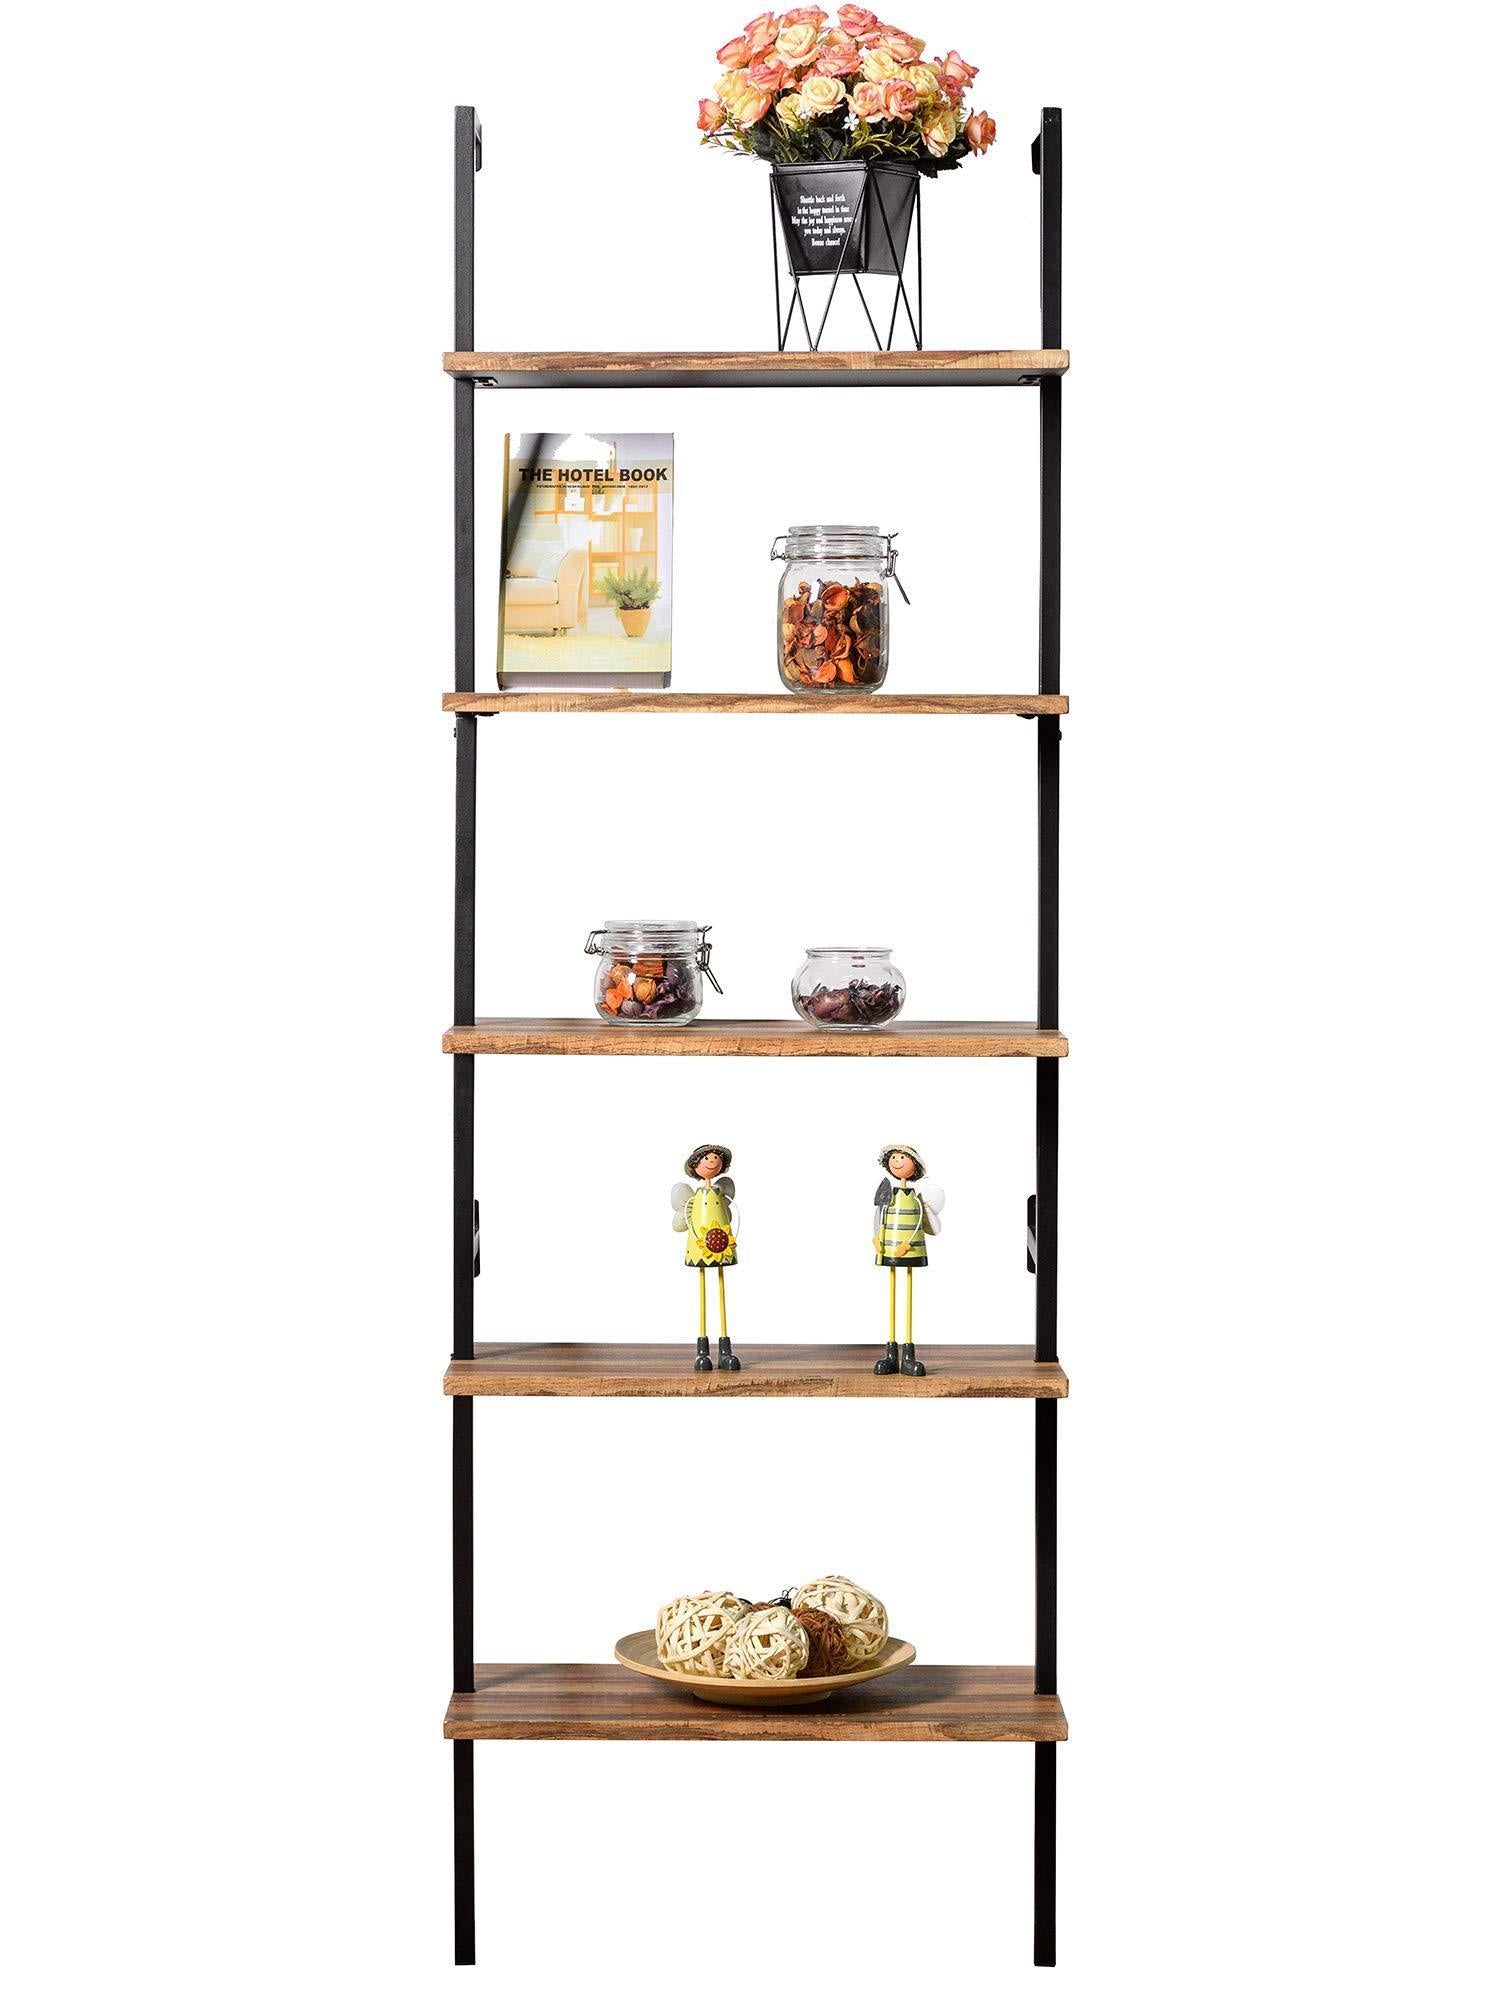 Save ironck industrial ladder shelf bookcase 5 tier wood shelves wall mounted stable expand space bookshelf retro wall decor furniture for living room kitchen bar storage